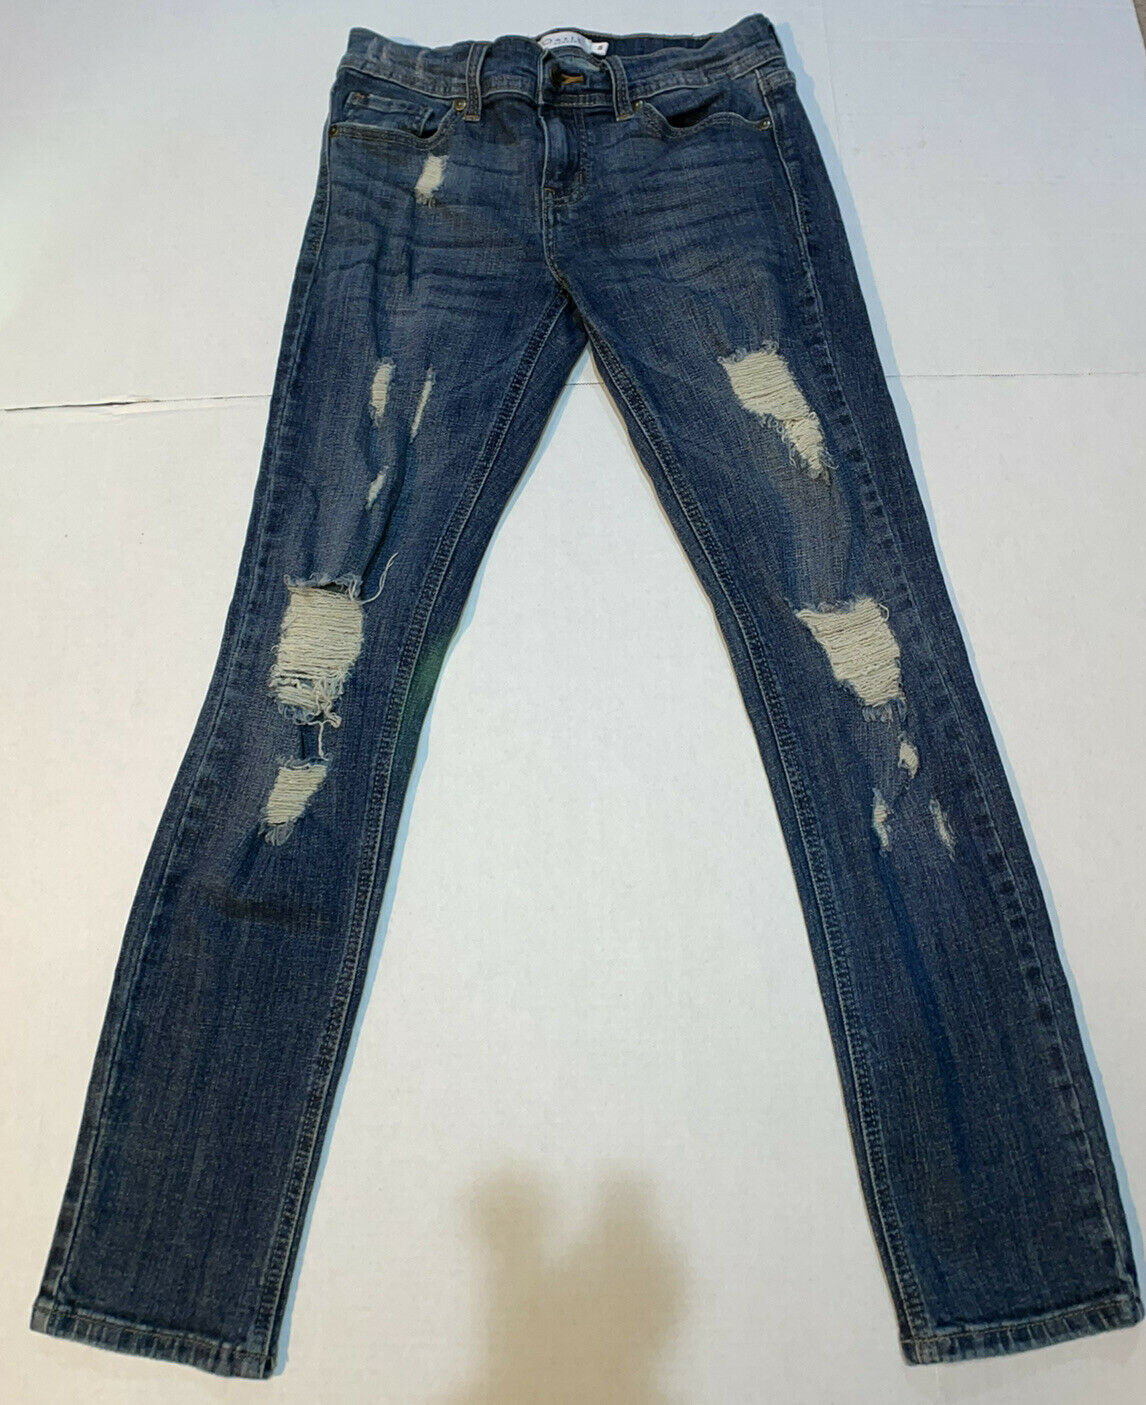 Oasis Jeans Girls Size 5 (o1)